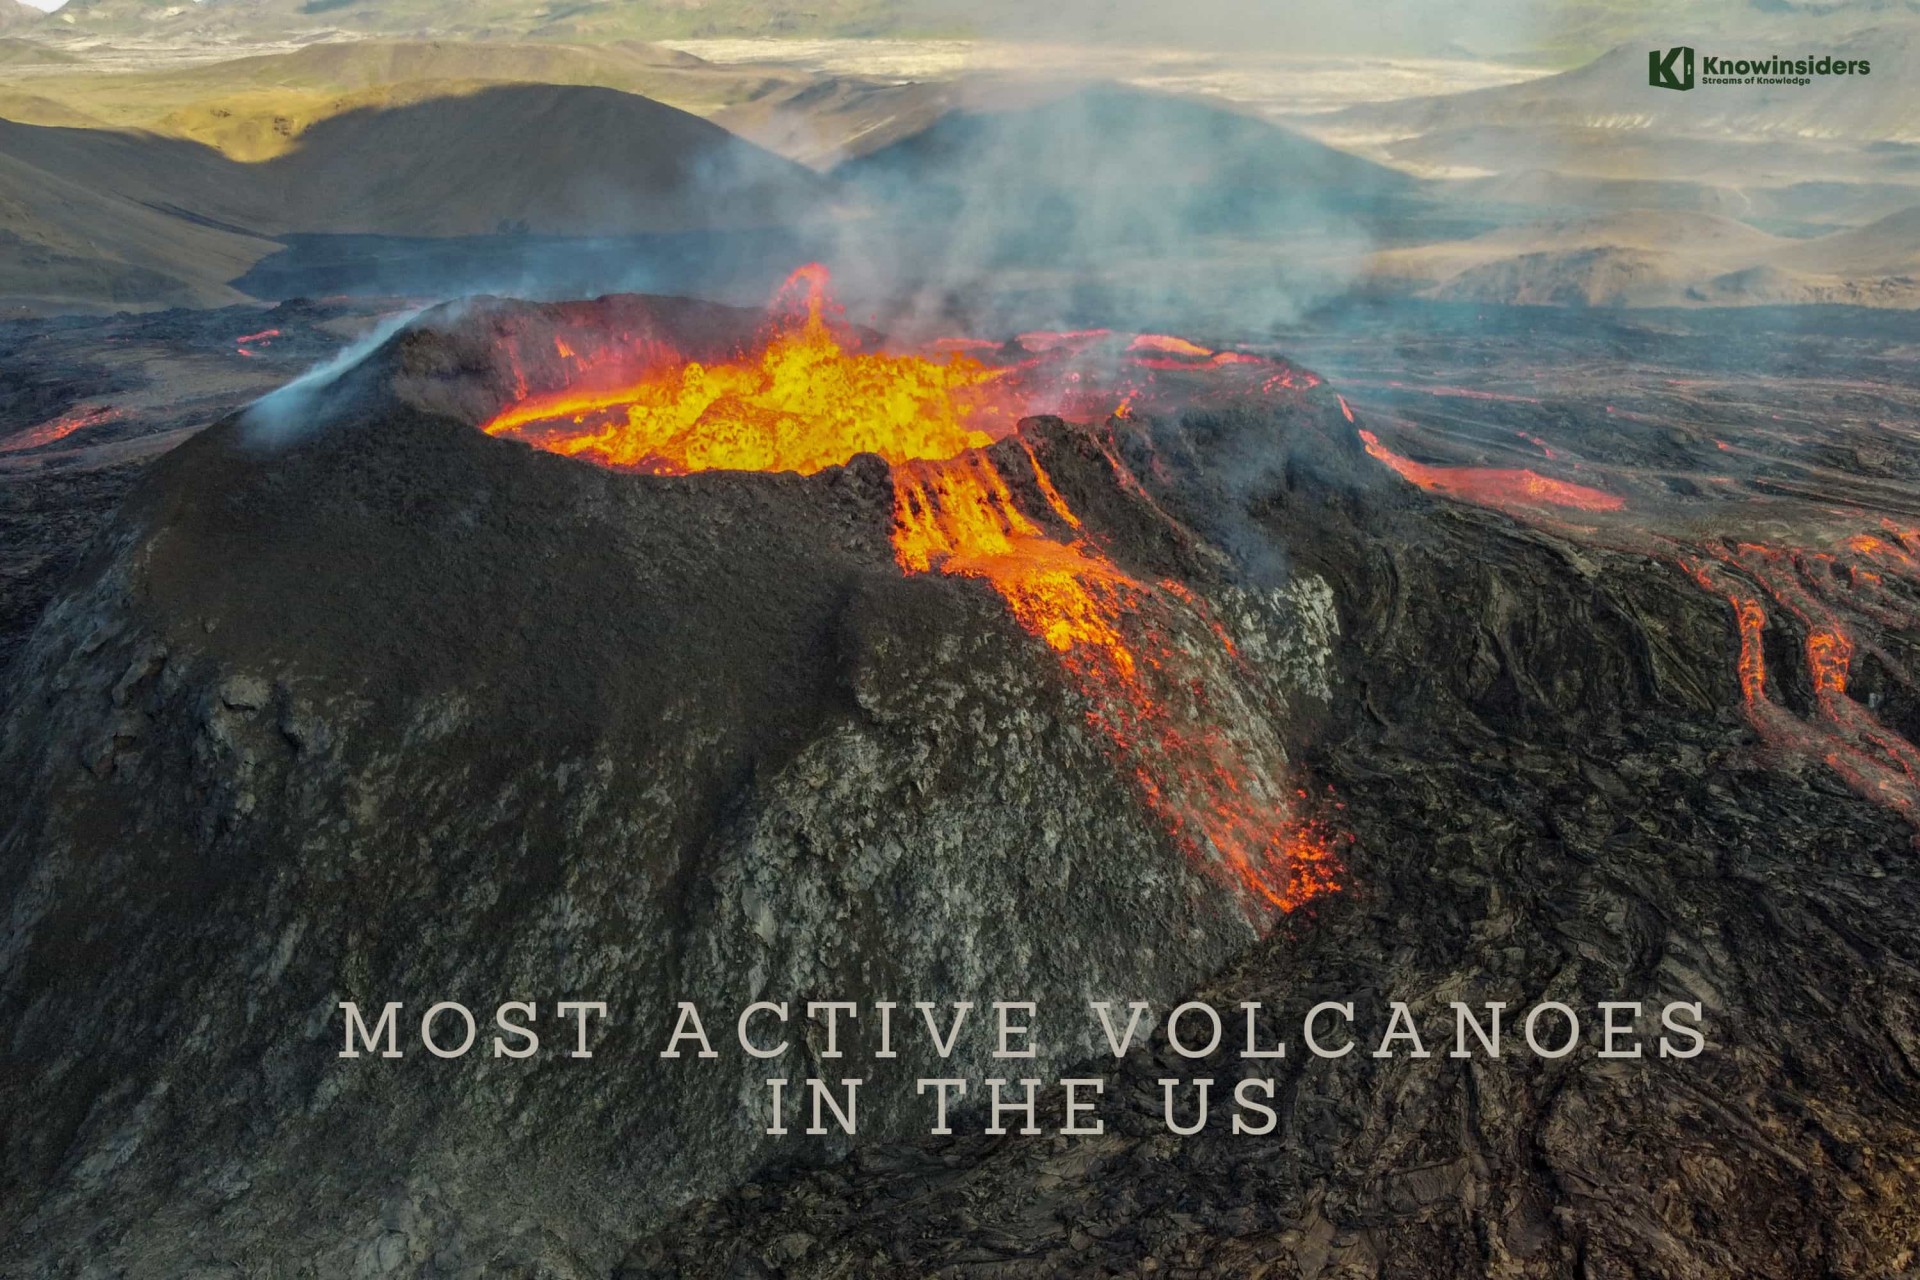 Top 10 Most Active Volcanoes in the US Today